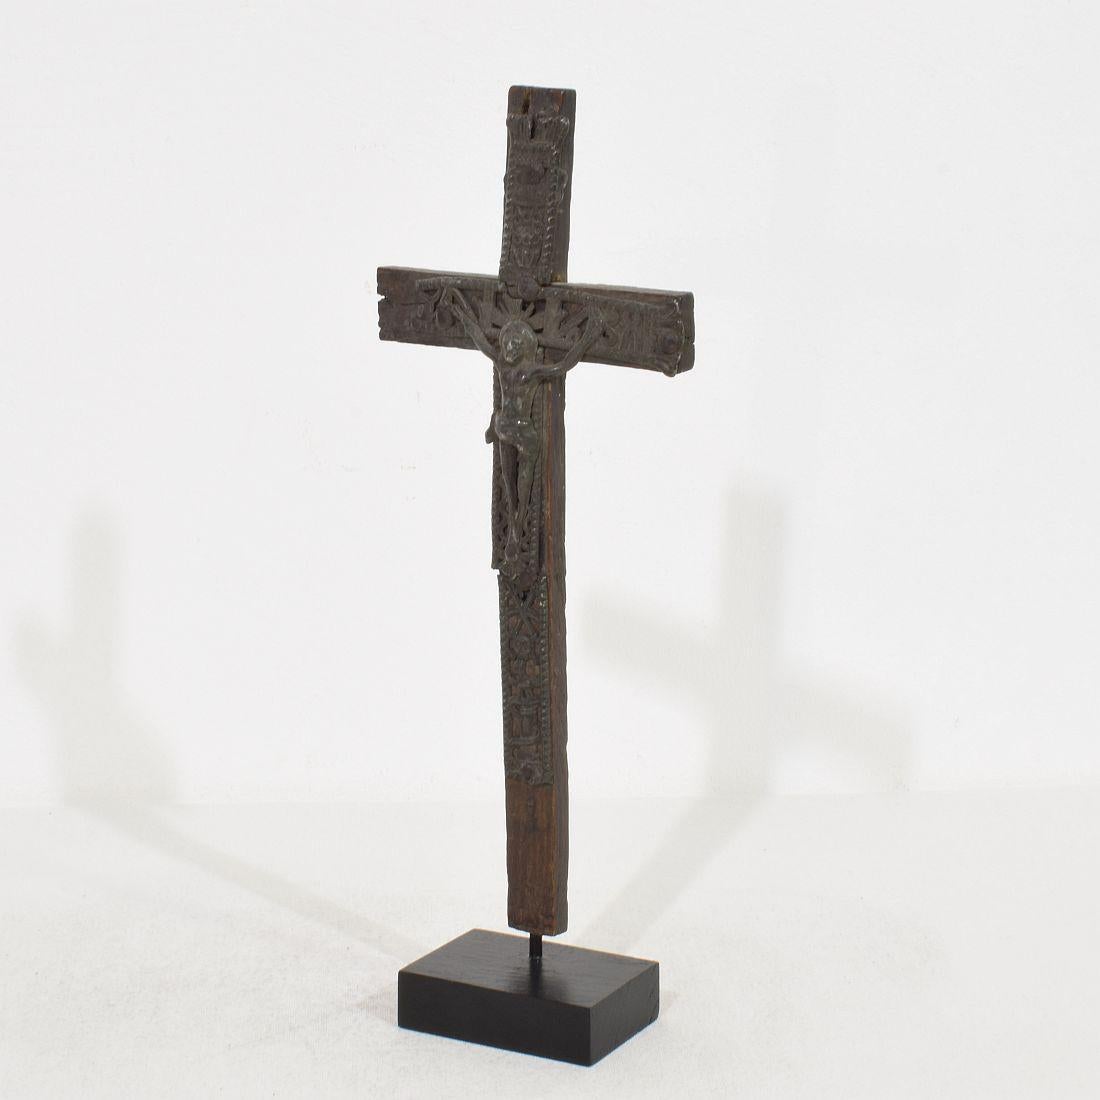 Wonderful small folk art pewter Christ figure on a cross. Richly decorated.
France circa 1650-1750. Weathered and small losses. Measurements include the wooden base.
H:28,5cm  W:11cm D:4,5cm 